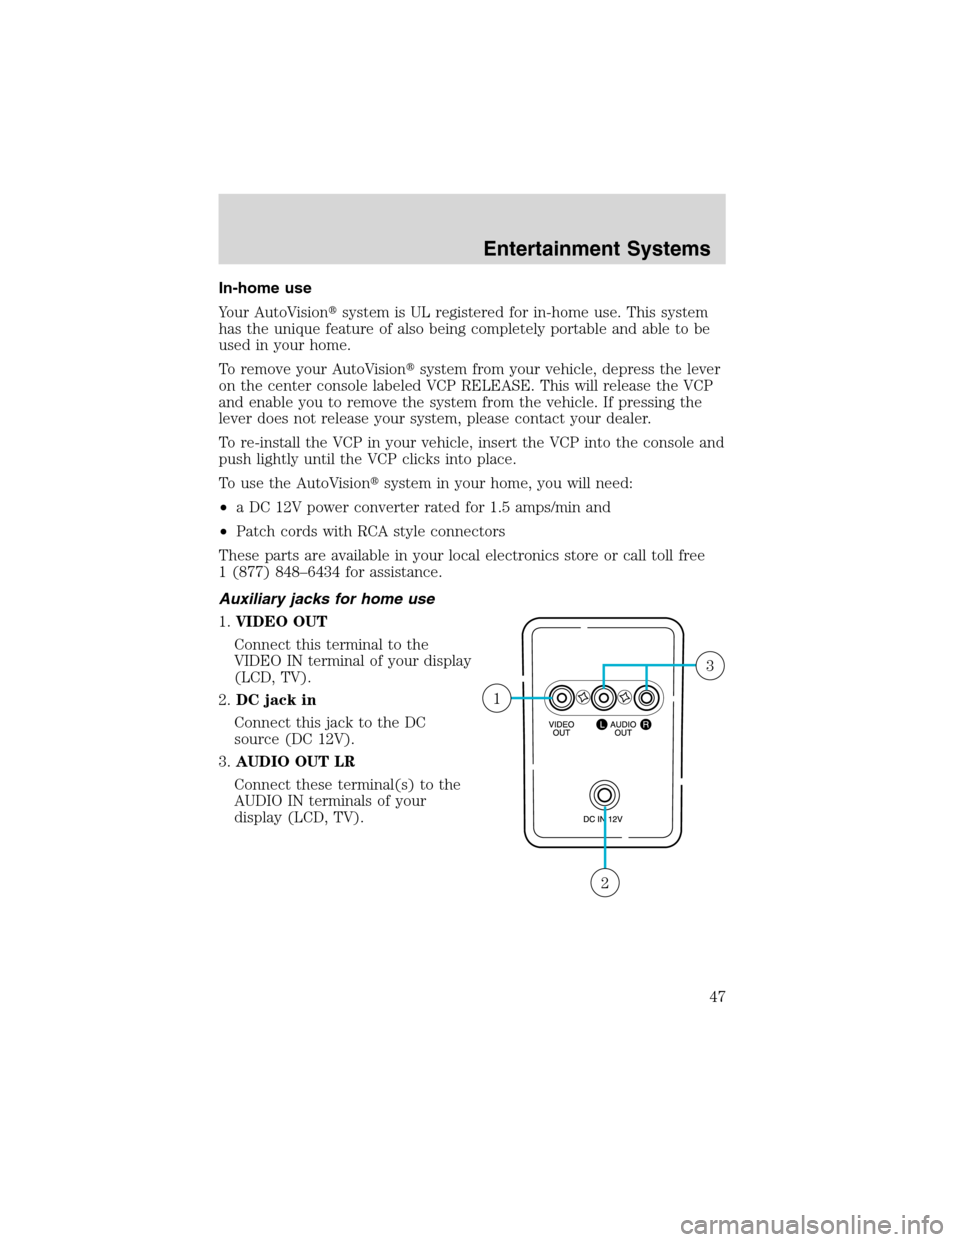 FORD E SERIES 2003 4.G Service Manual In-home use
Your AutoVisionsystem is UL registered for in-home use. This system
has the unique feature of also being completely portable and able to be
used in your home.
To remove your AutoVisionsy